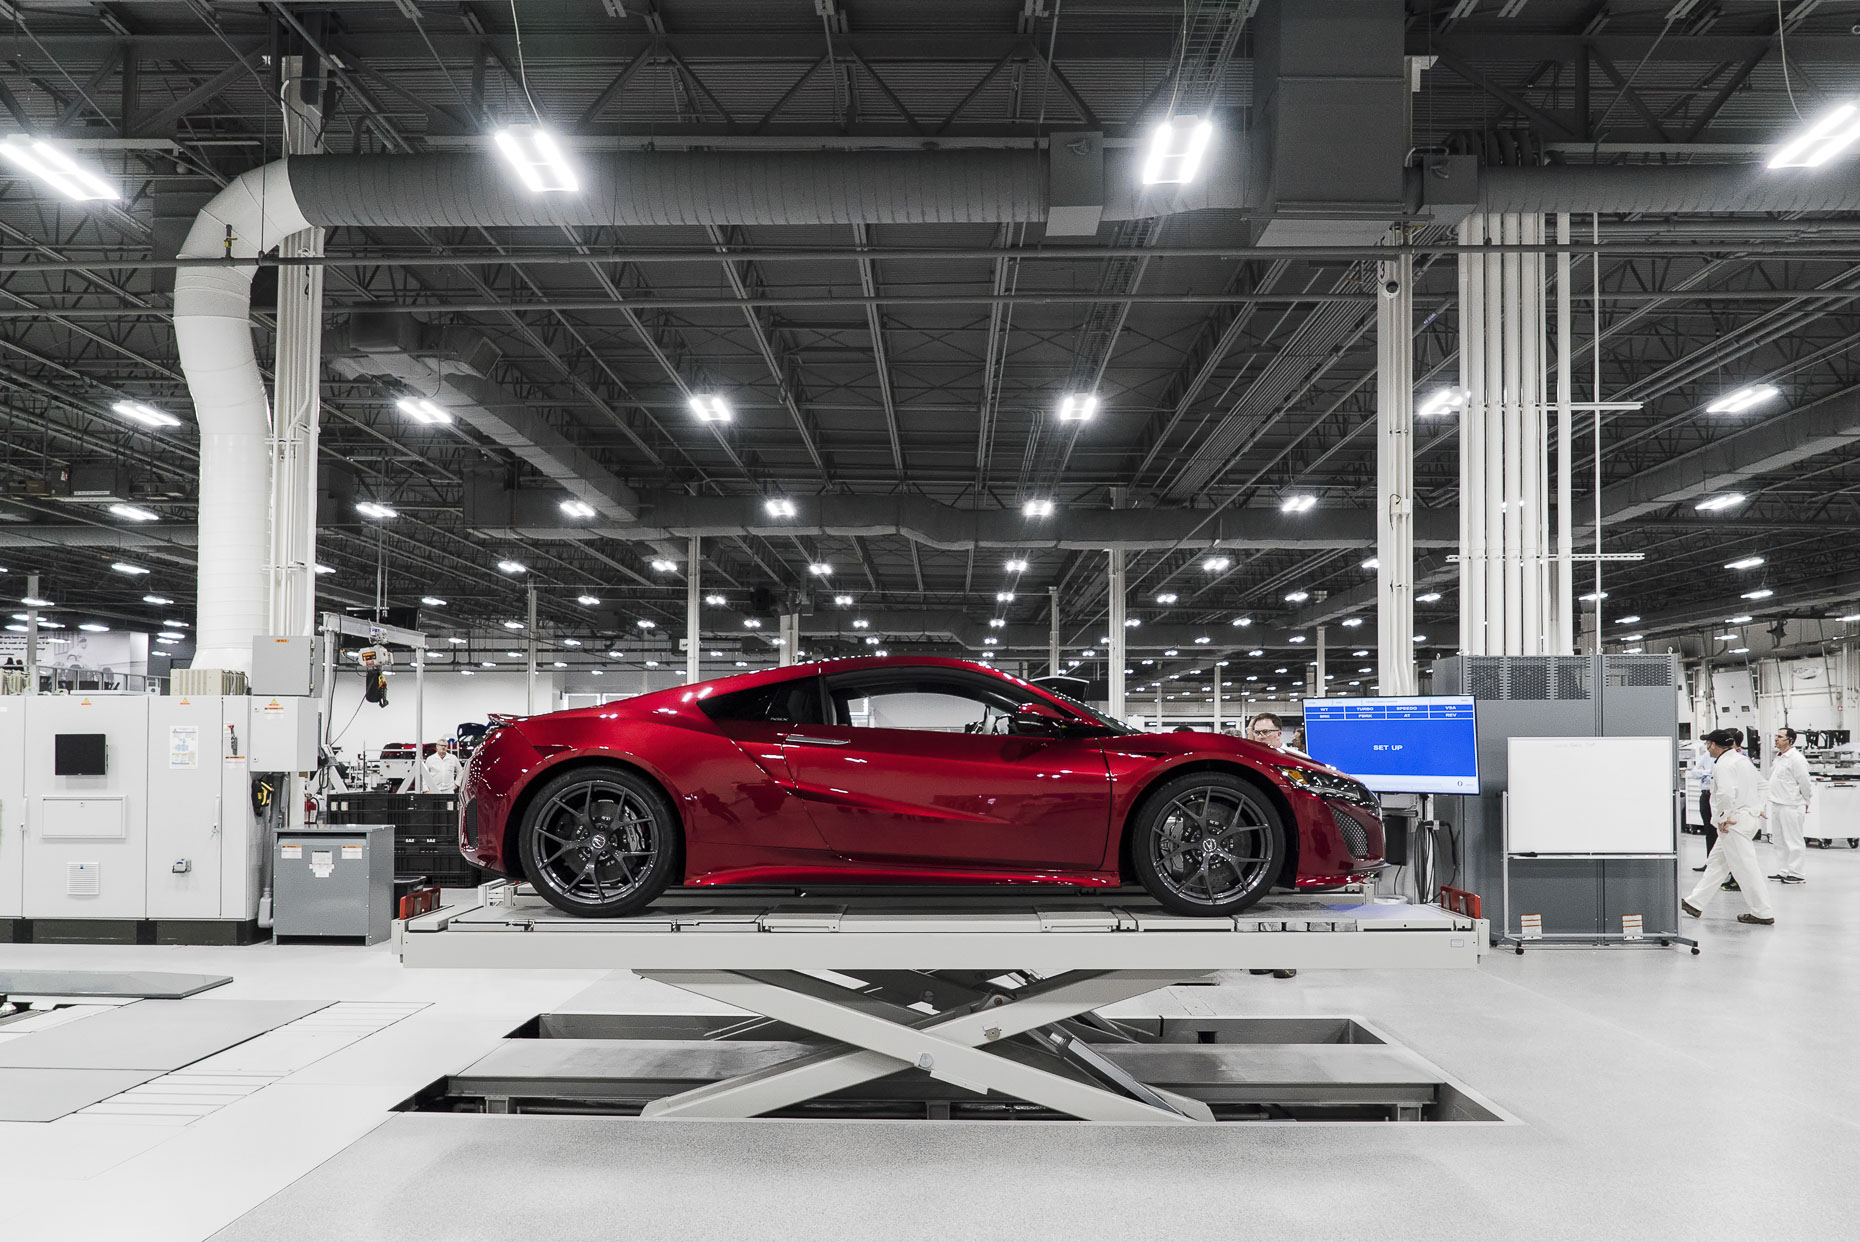 2017 Acura NSX for AUTOWeek photographed by Lauren K Davis based in Columbus, Ohio